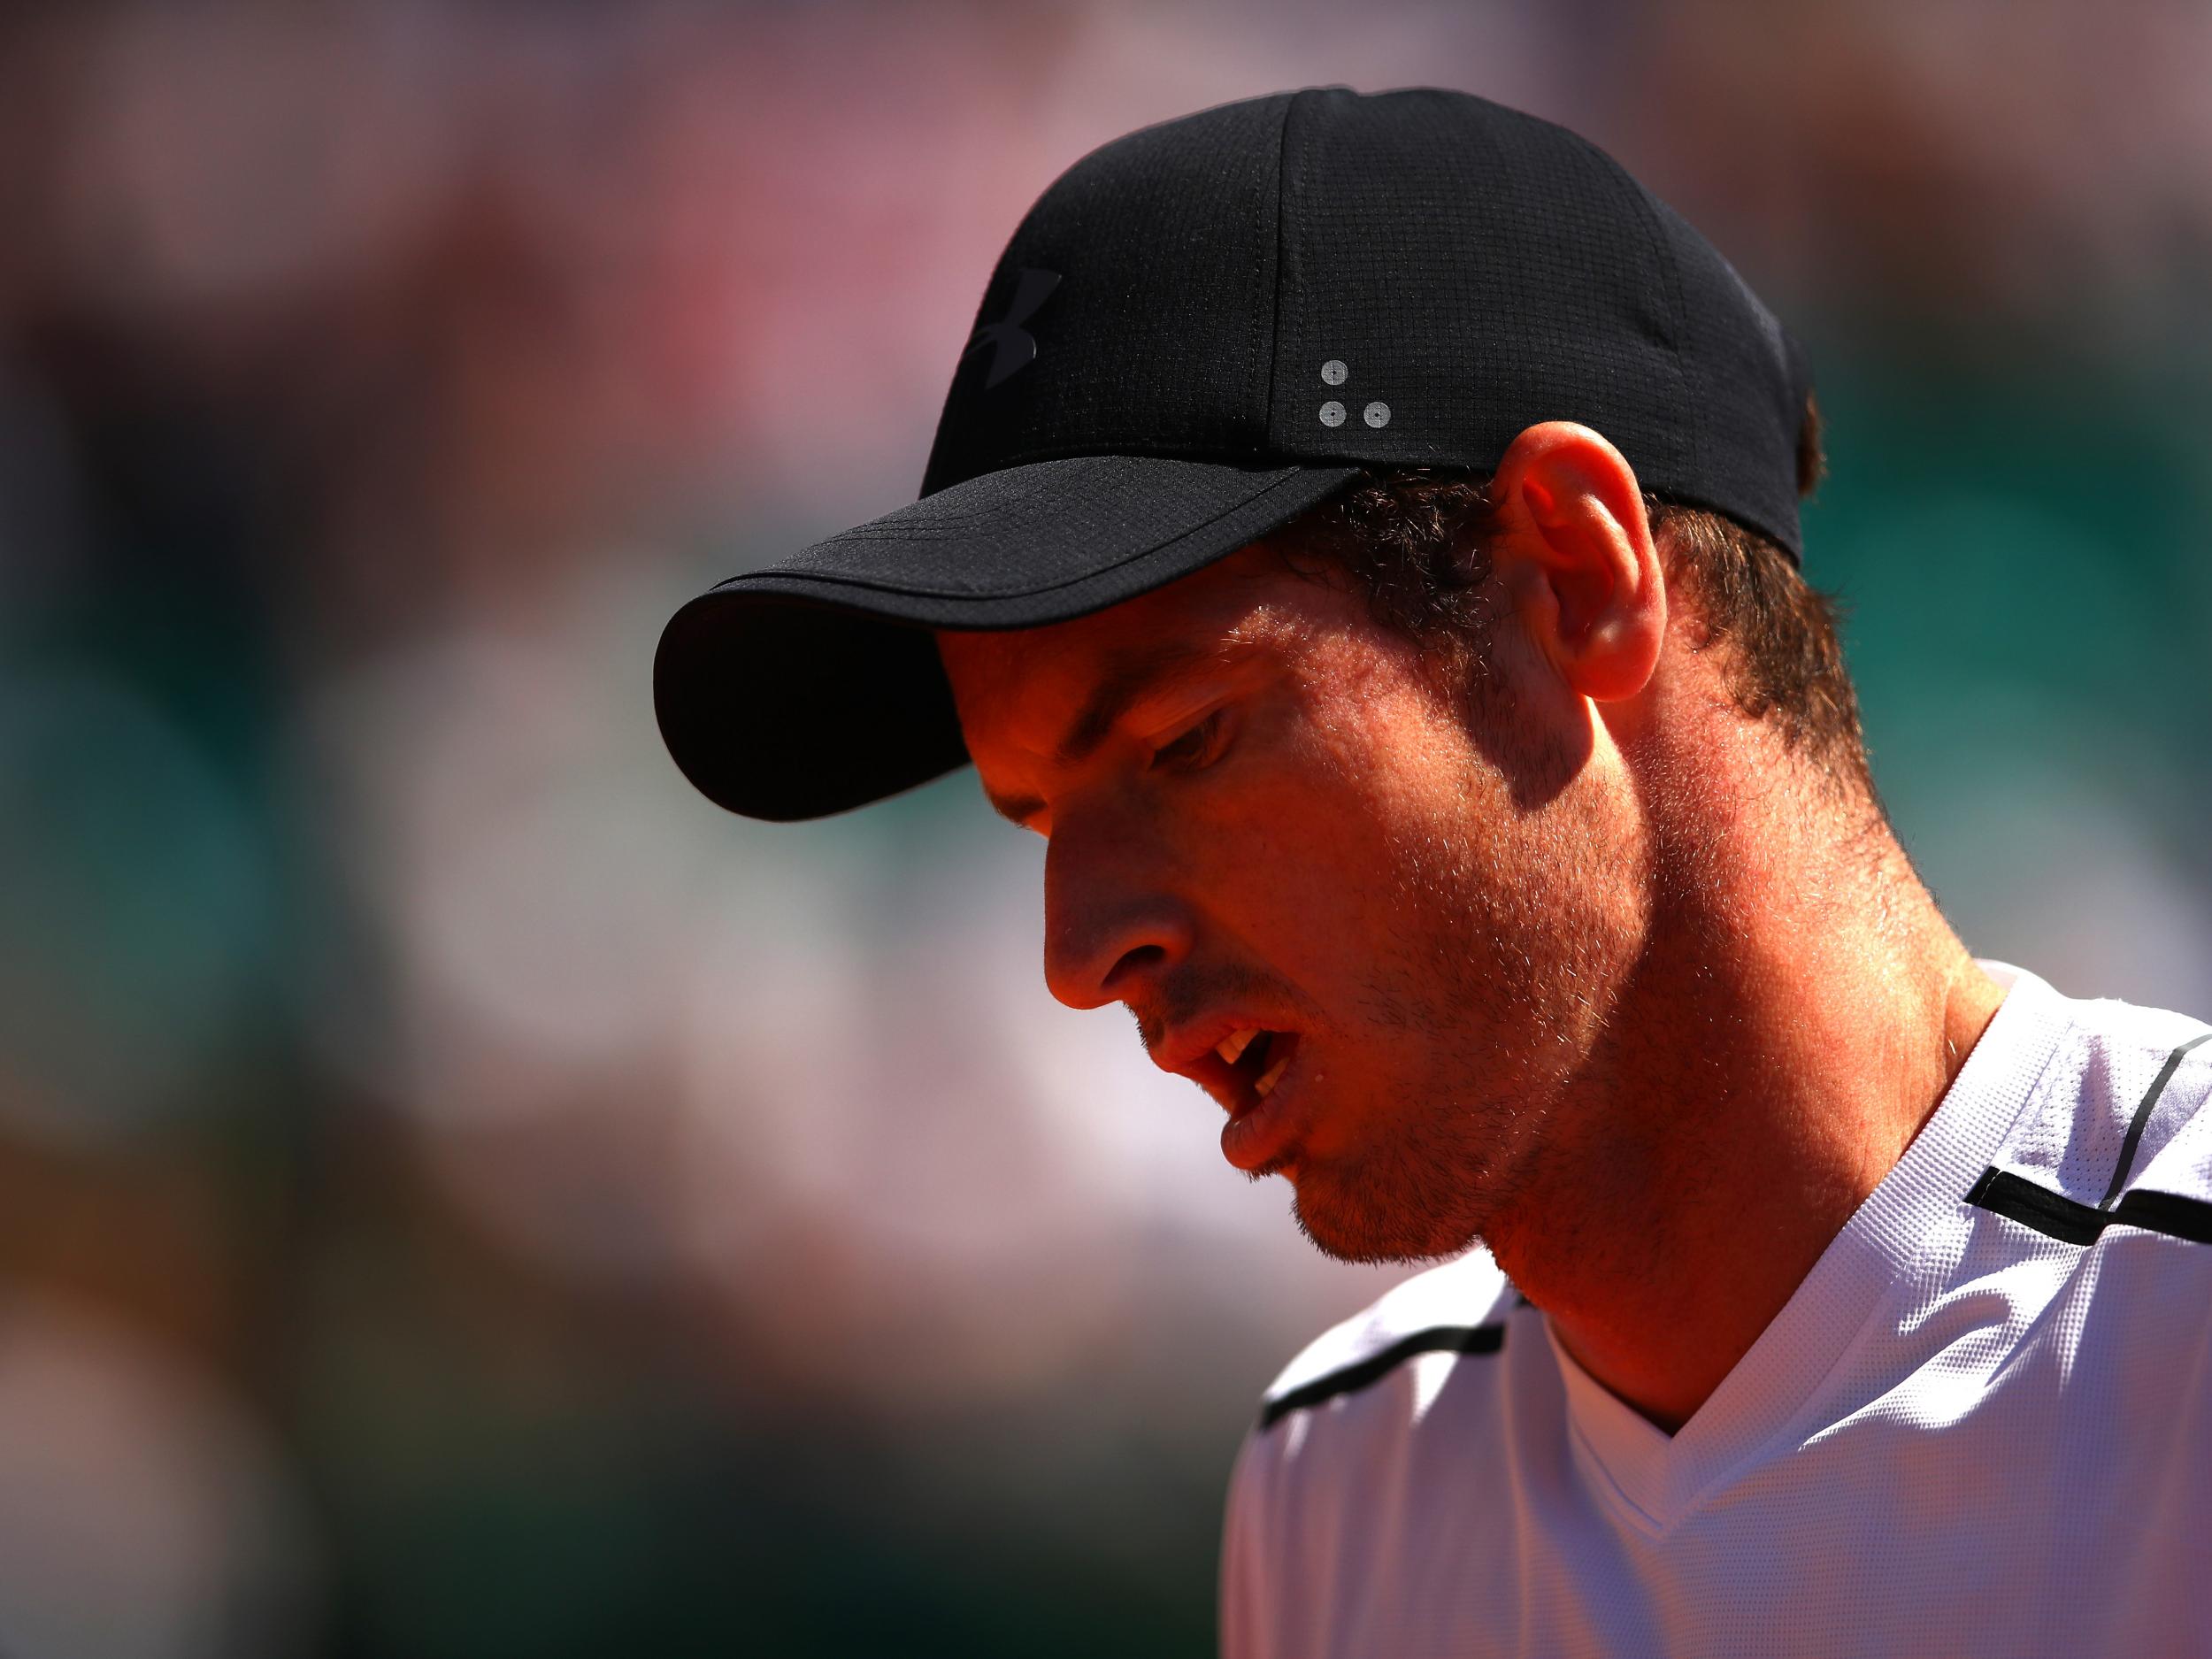 Murray will be hoping to atone for his poor display in Monte Carlo